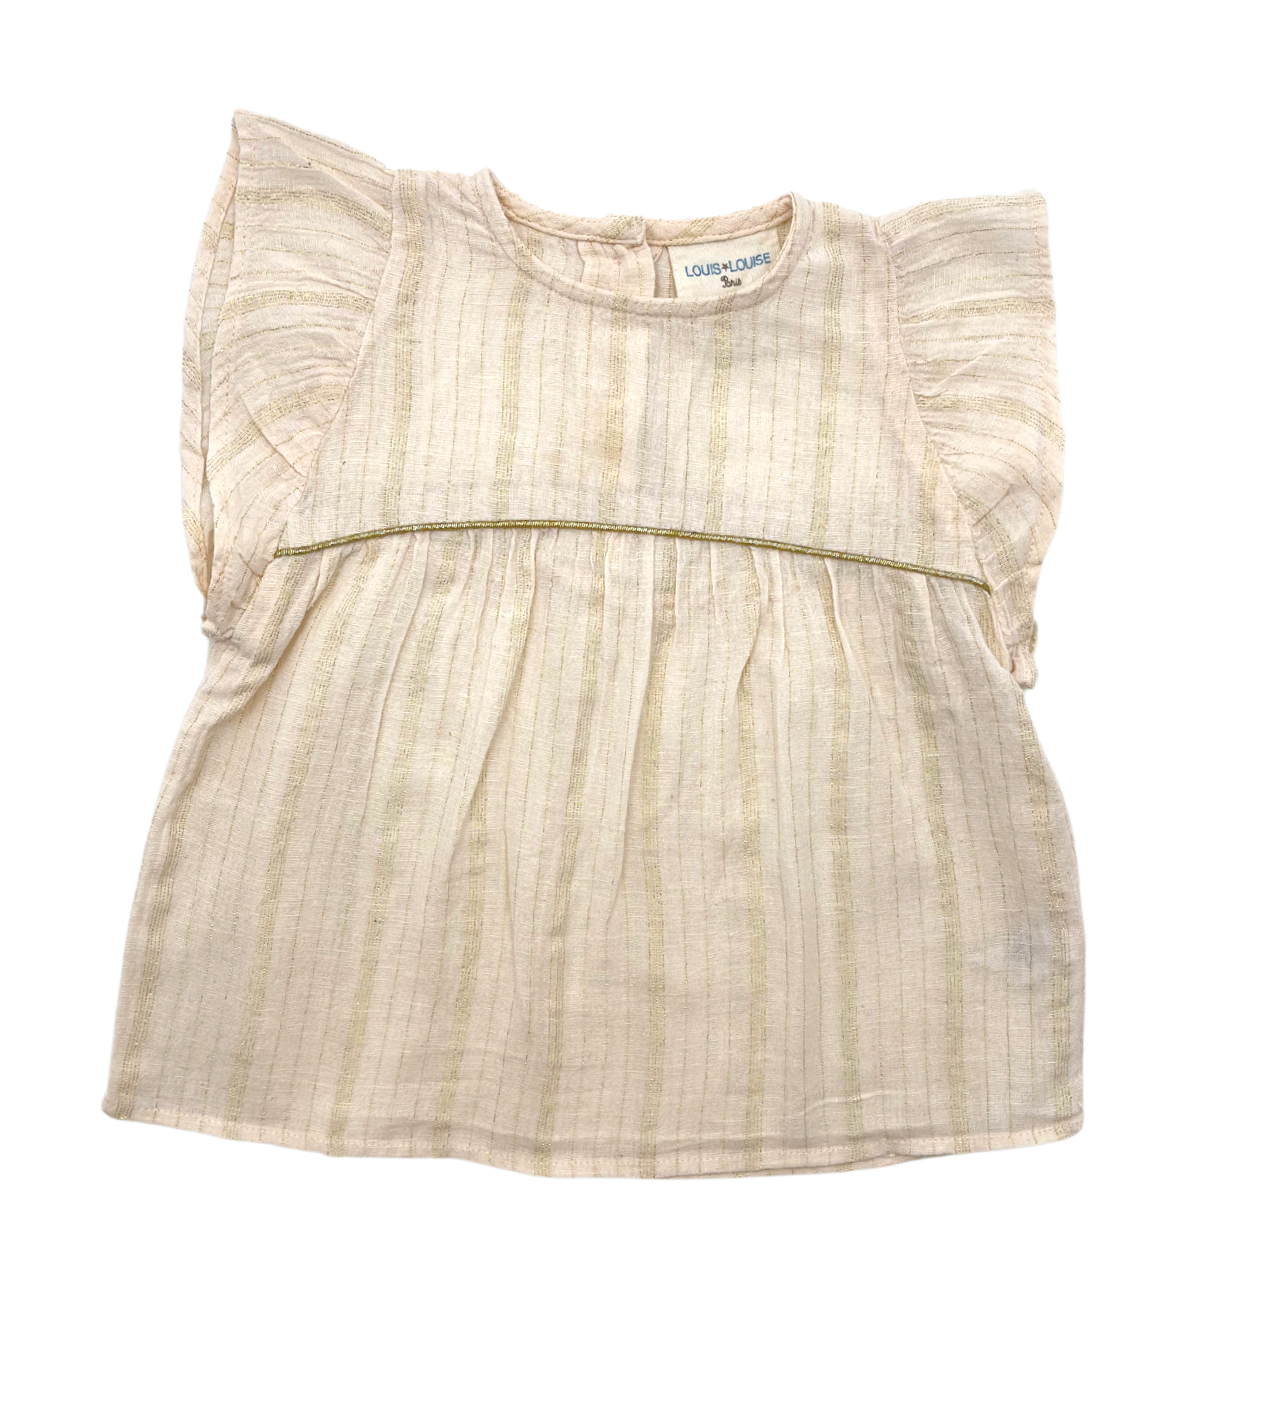 LOUIS LOUISE - Beige &amp; gold blouse - 2 years old